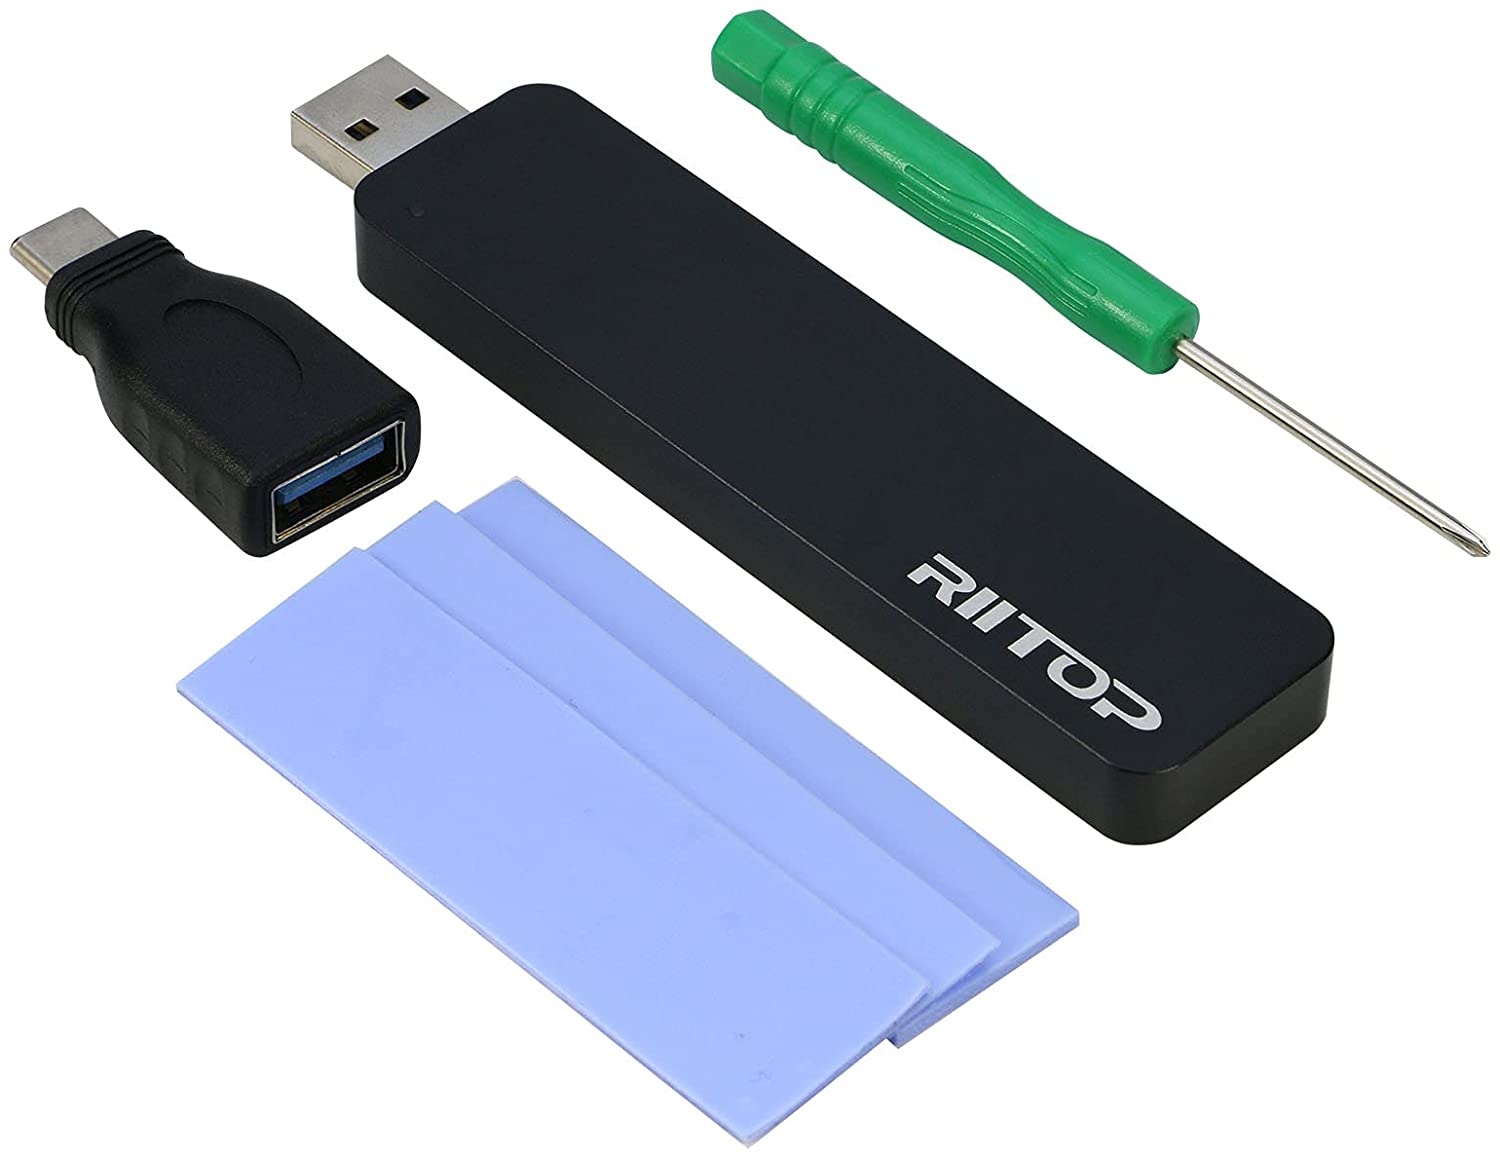 M.2 to USB Enclosure, RIITOP M2 SSD to USB 3.1 (Type-A) Reader with Ca